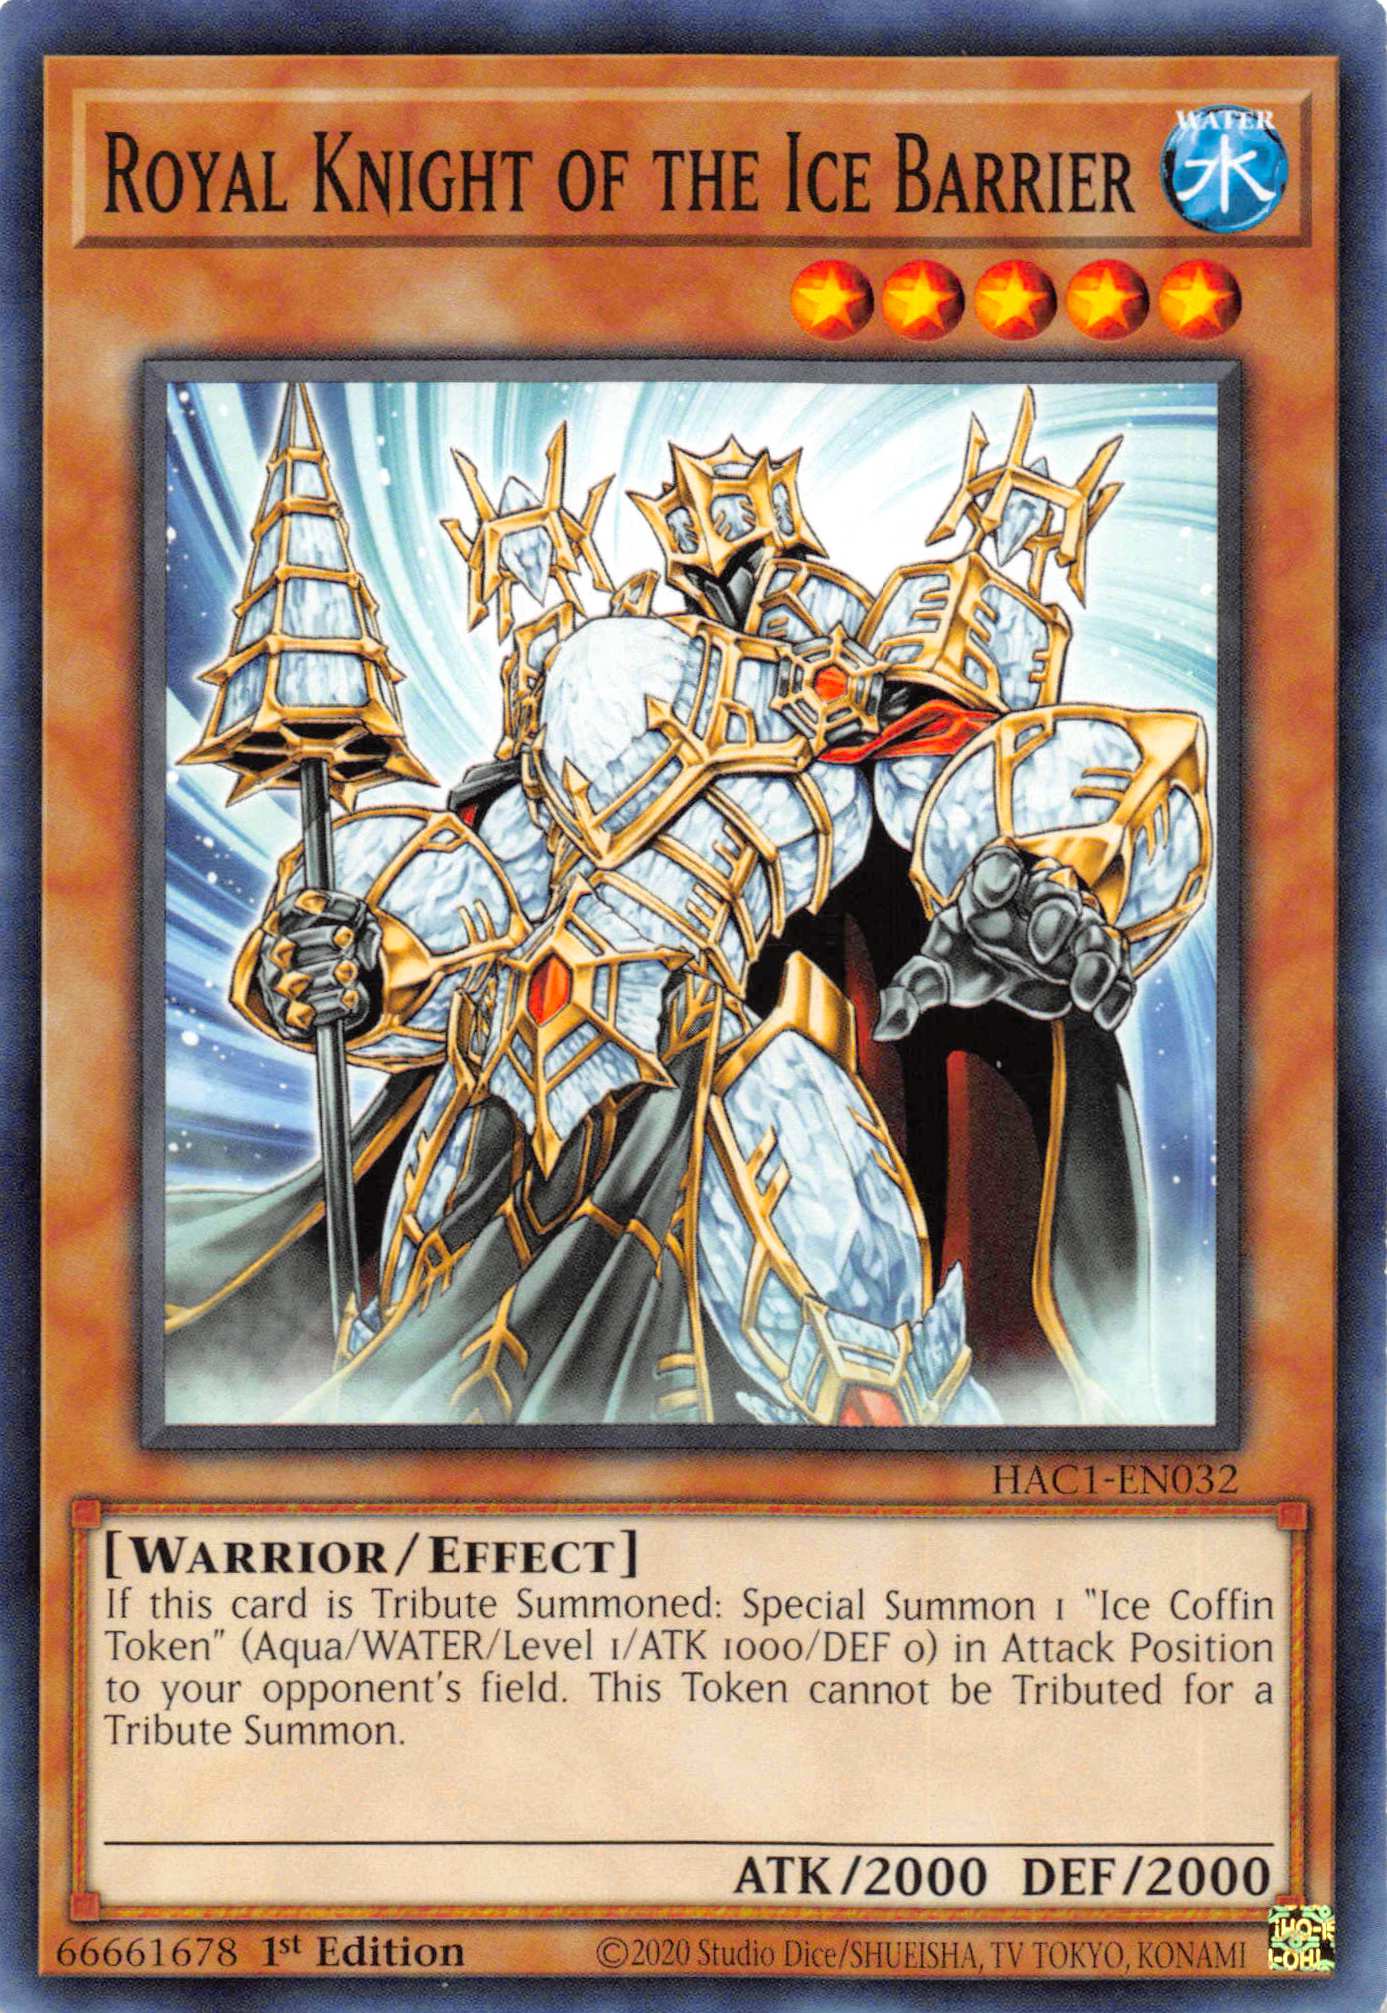 Royal Knight of the Ice Barrier (Duel Terminal) [HAC1-EN032] Parallel Rare | Kessel Run Games Inc. 